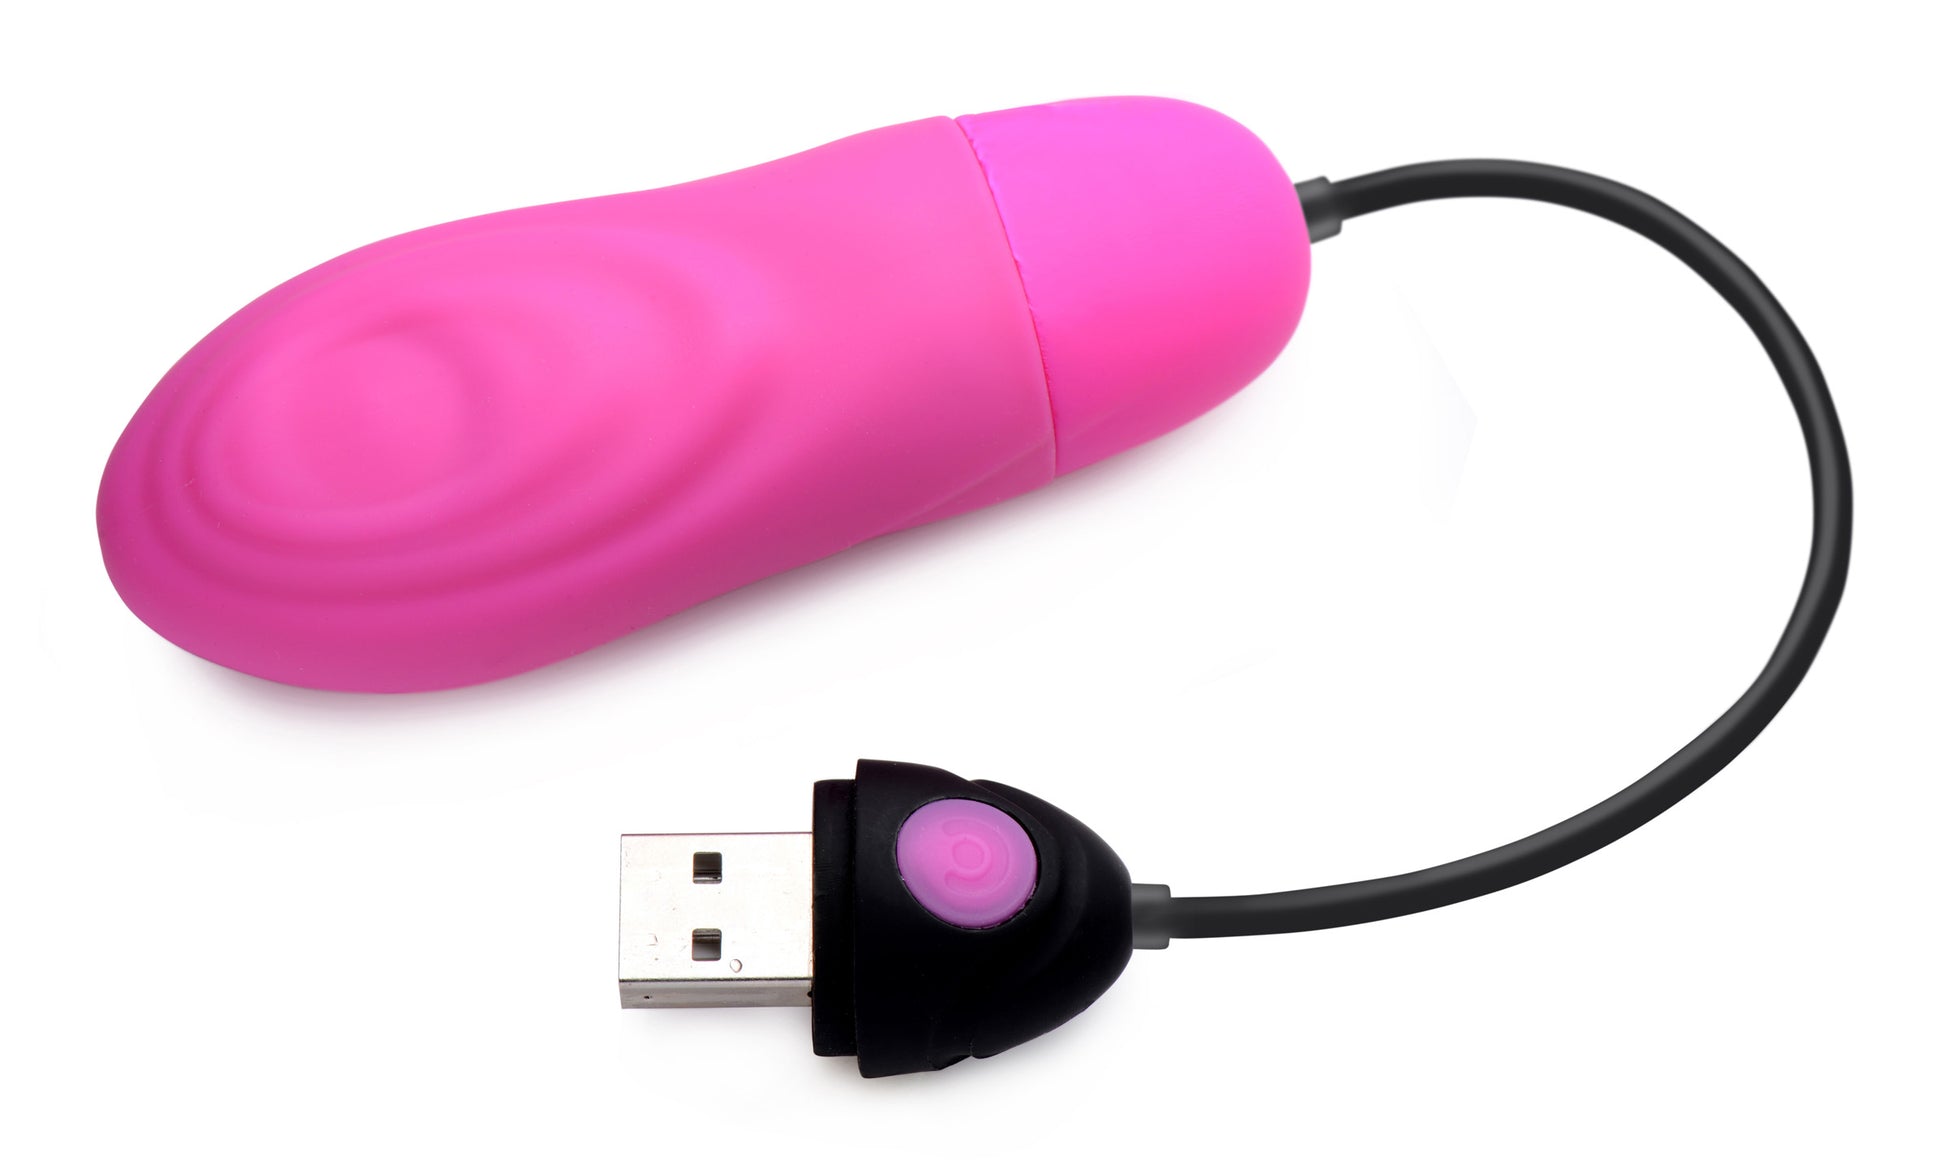 7X Pulsing Rechargeable Silicone Vibrator - Pink - UABDSM